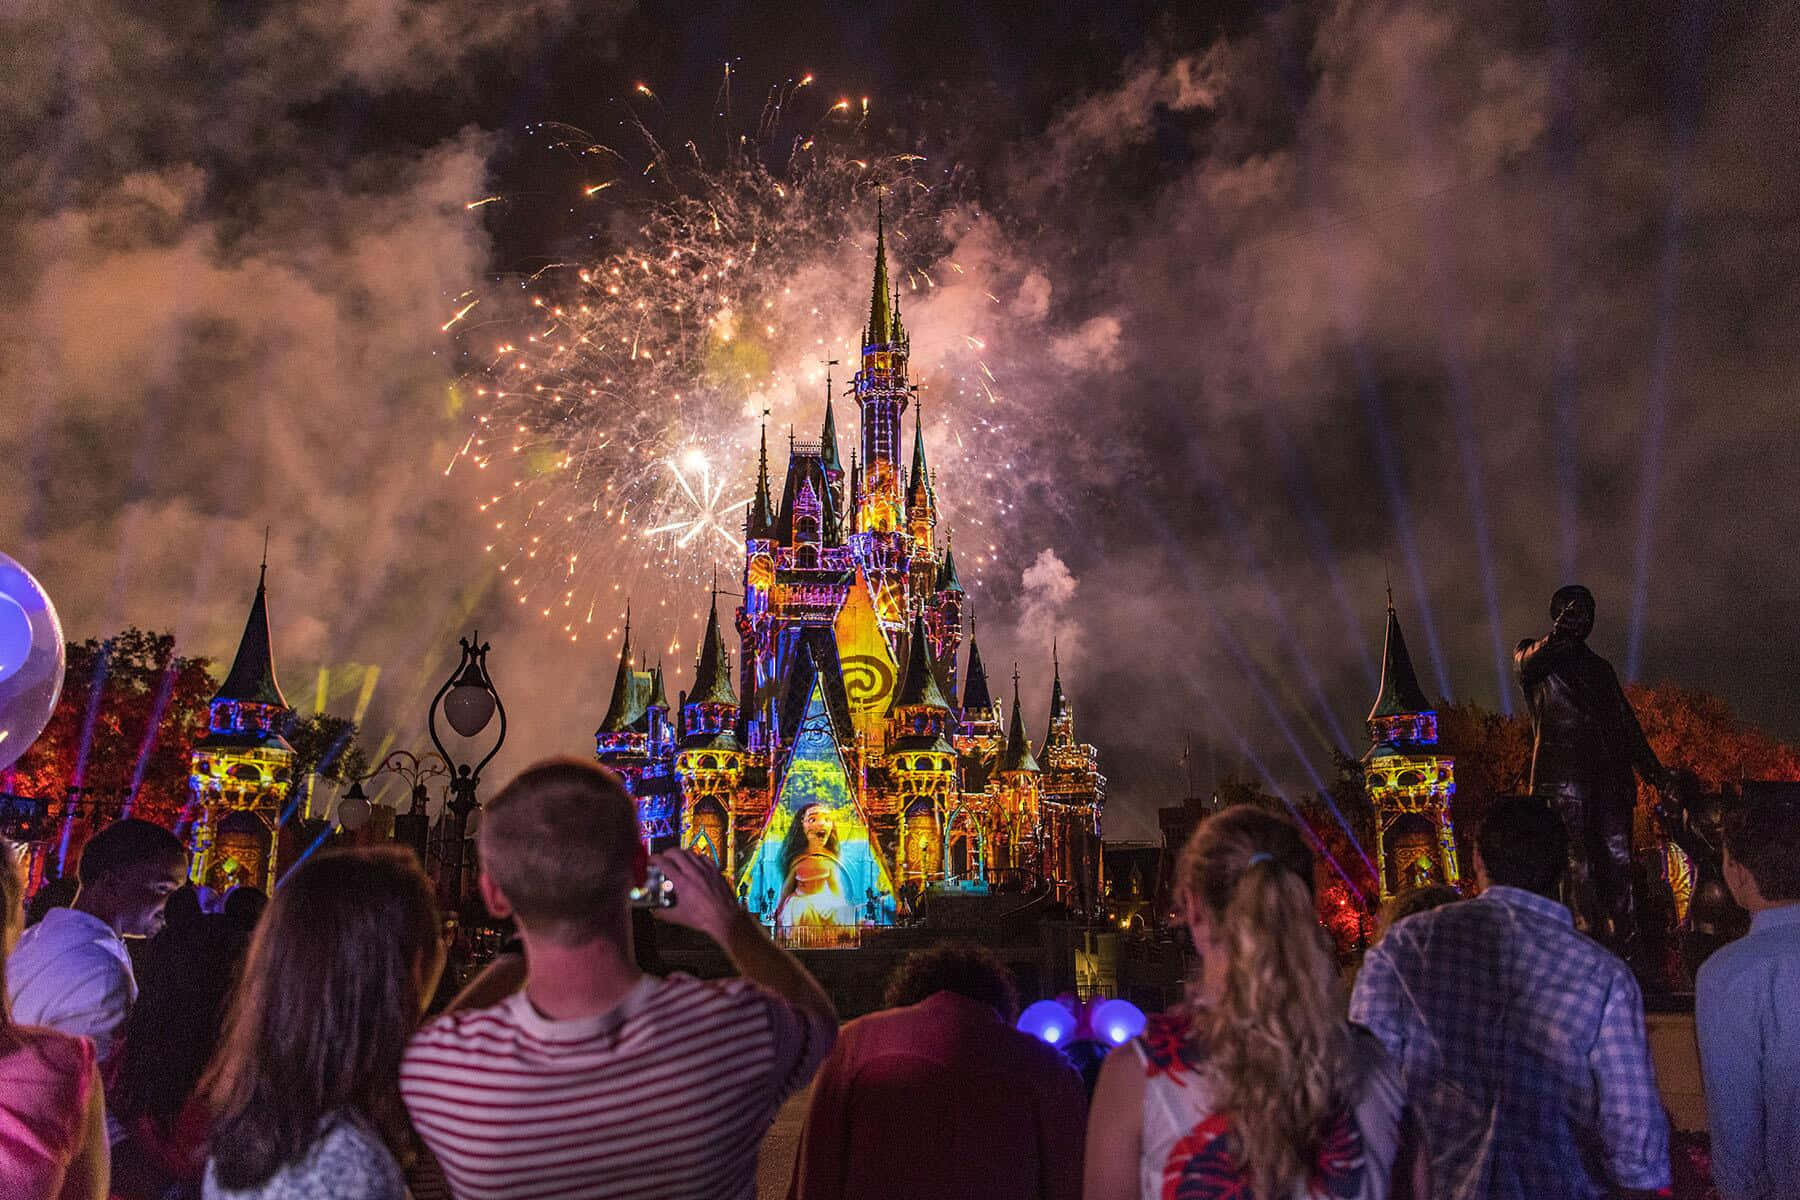 A magical time for the whole family experience at Disney World